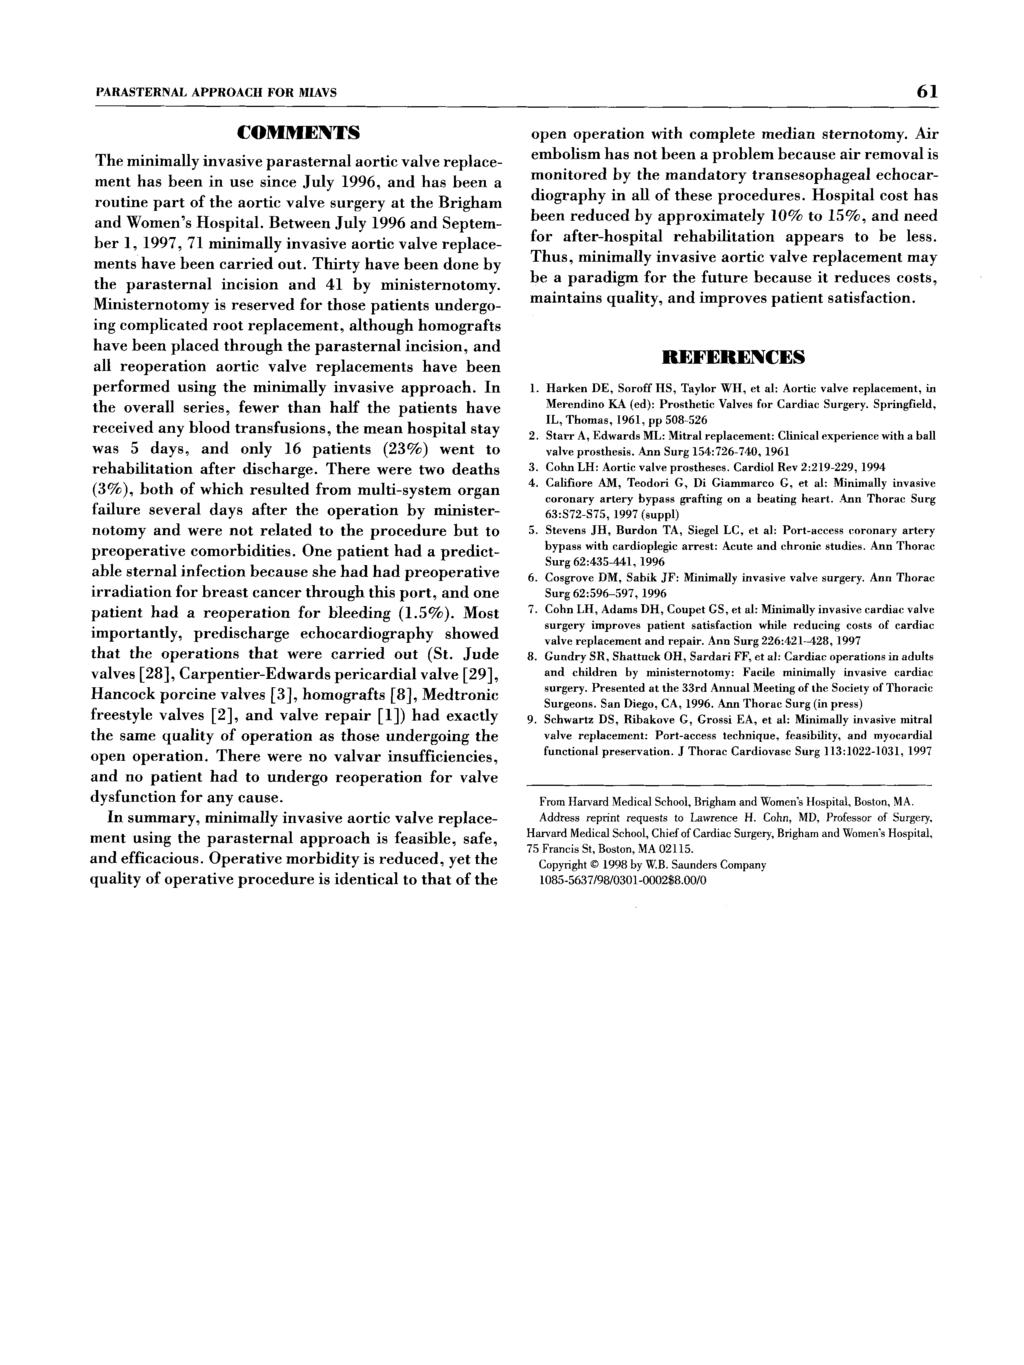 PARASTERNAL APPROACH FOR MIAVS 61 COMMENTS The minimally invasive parasternal aortic valve replacement has been in use since July 1996, and has been a routine part of the aortic valve surgery at the